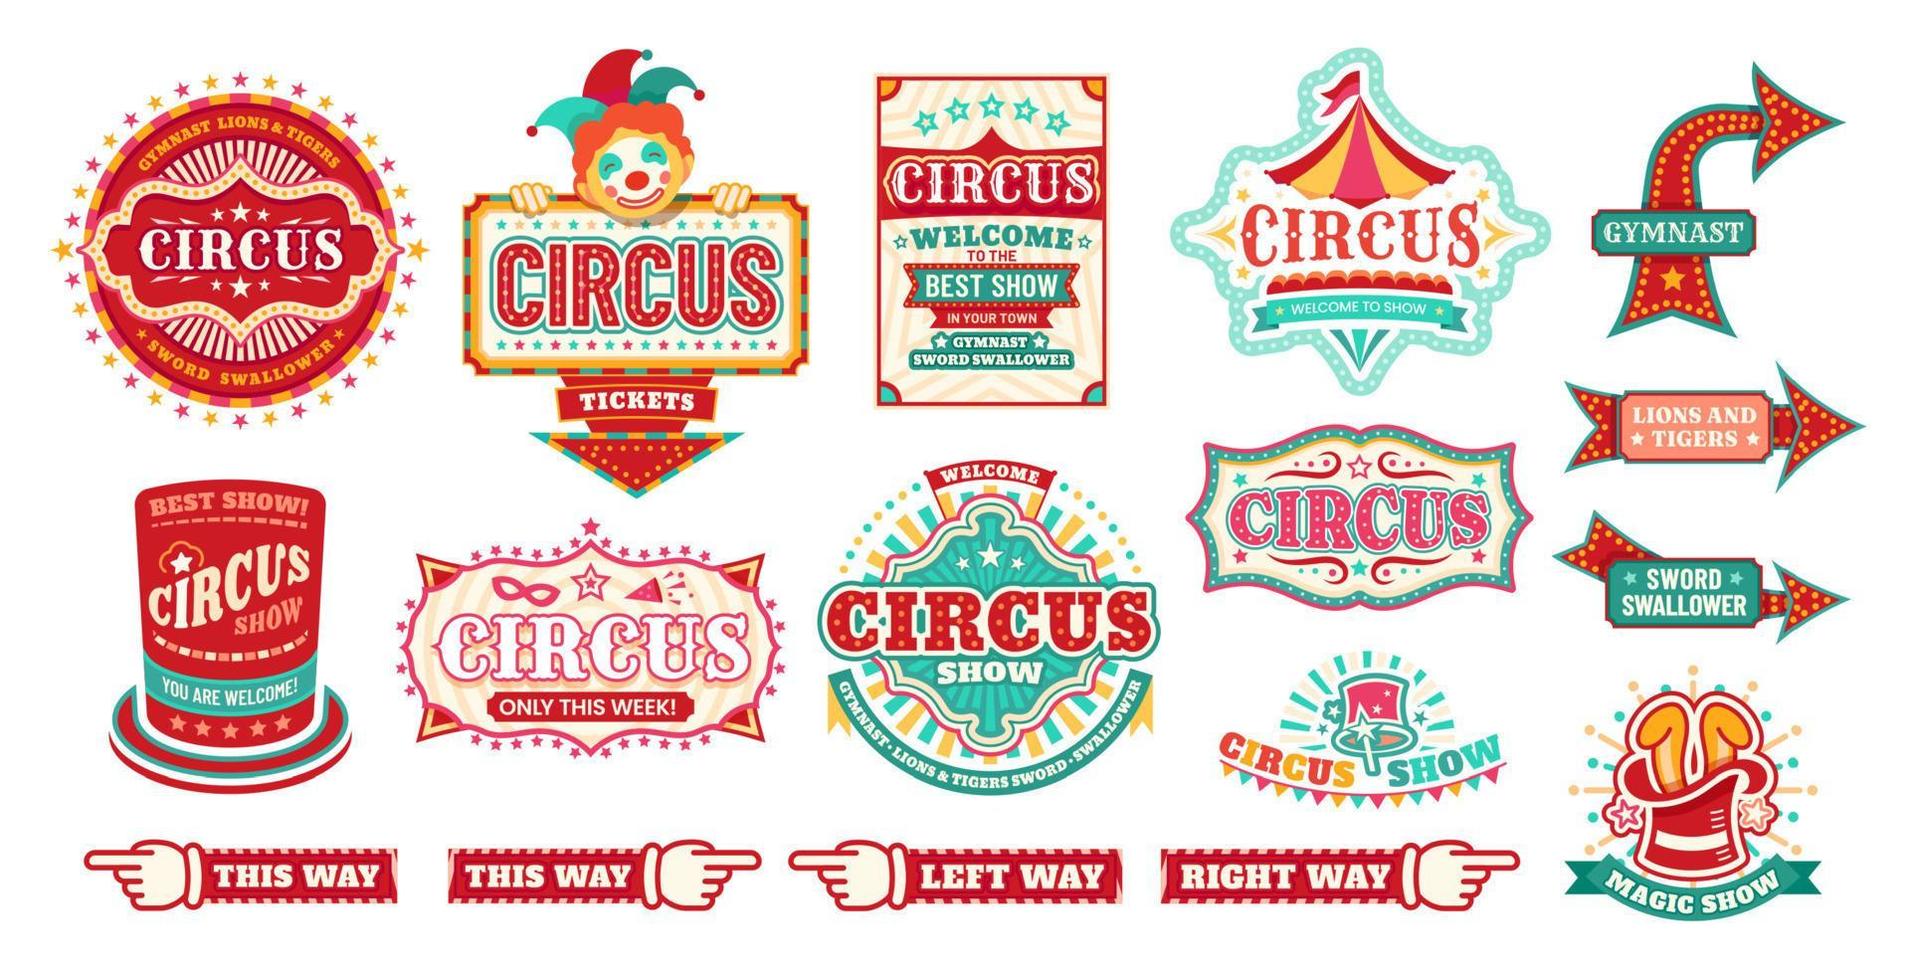 Circus carnival signs and signboards to magic show vector